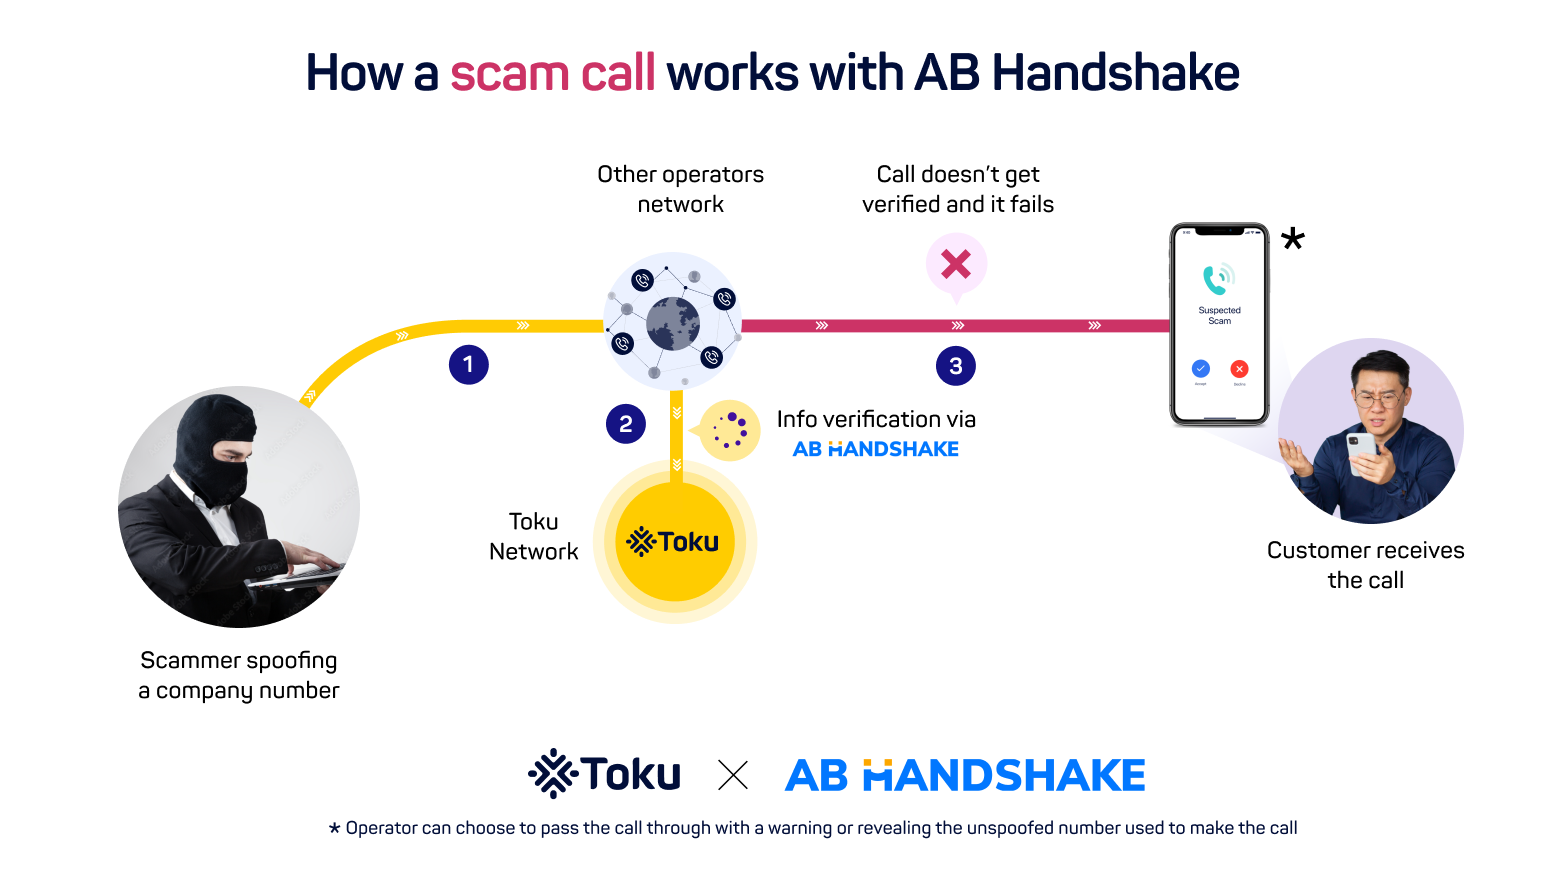 How a scam call works with AB Handshake